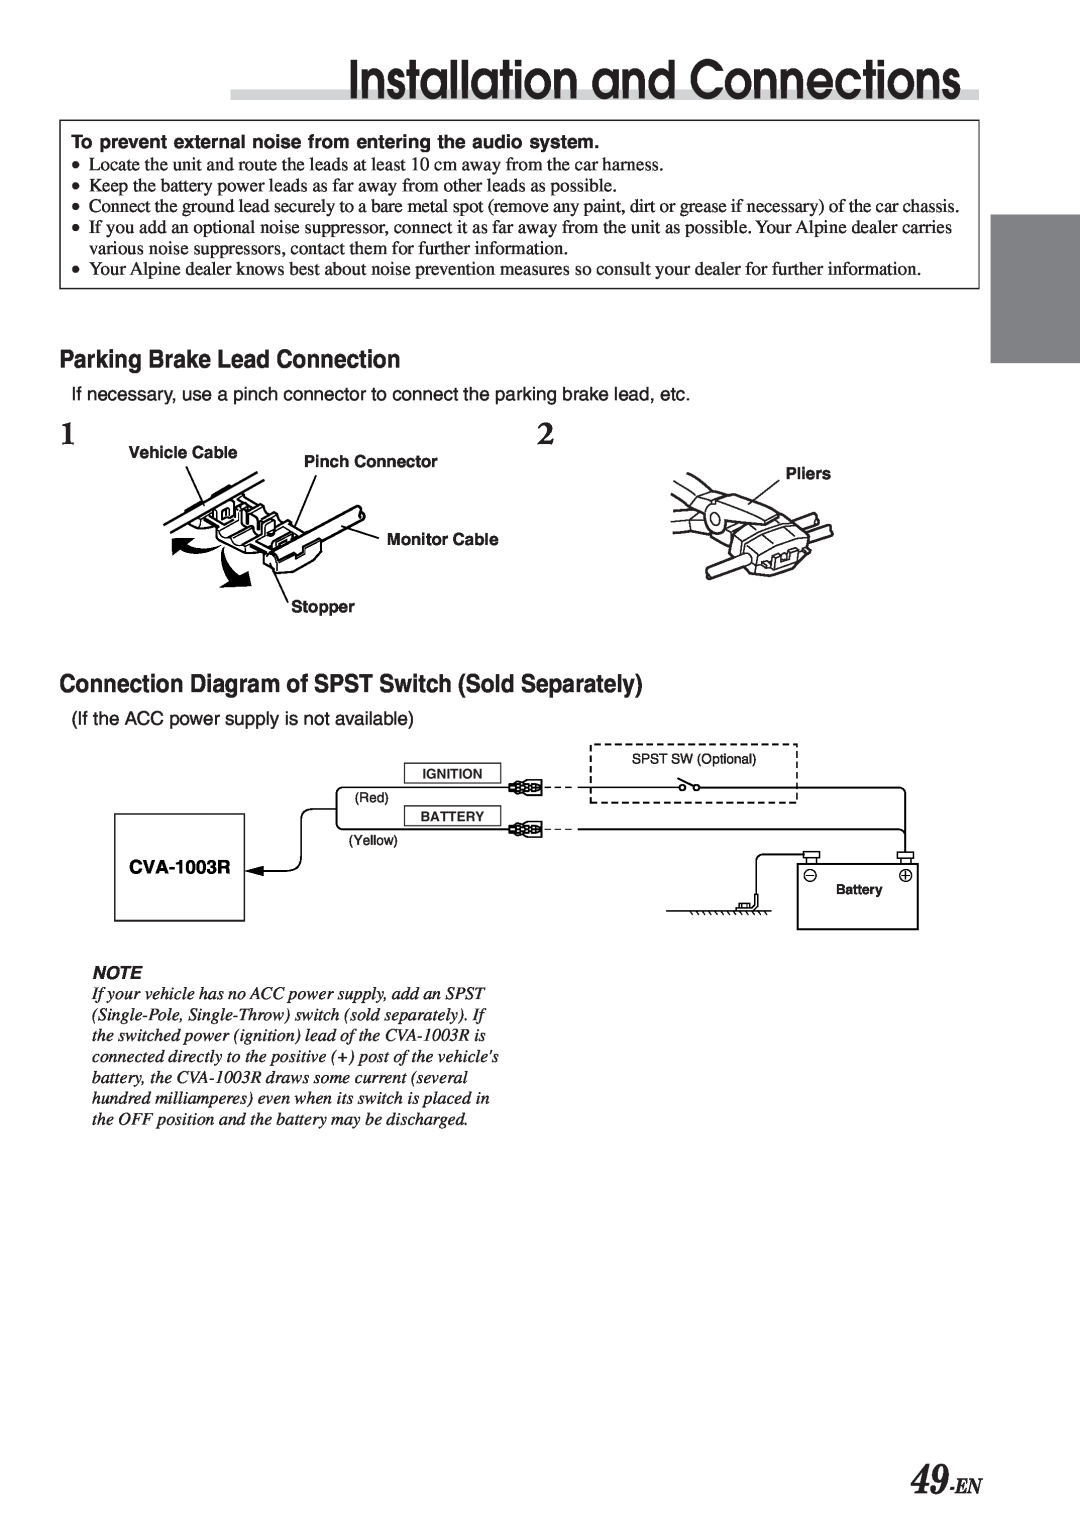 Alpine CVA-1003R owner manual Parking Brake Lead Connection, Connection Diagram of SPST Switch Sold Separately, 49-EN 